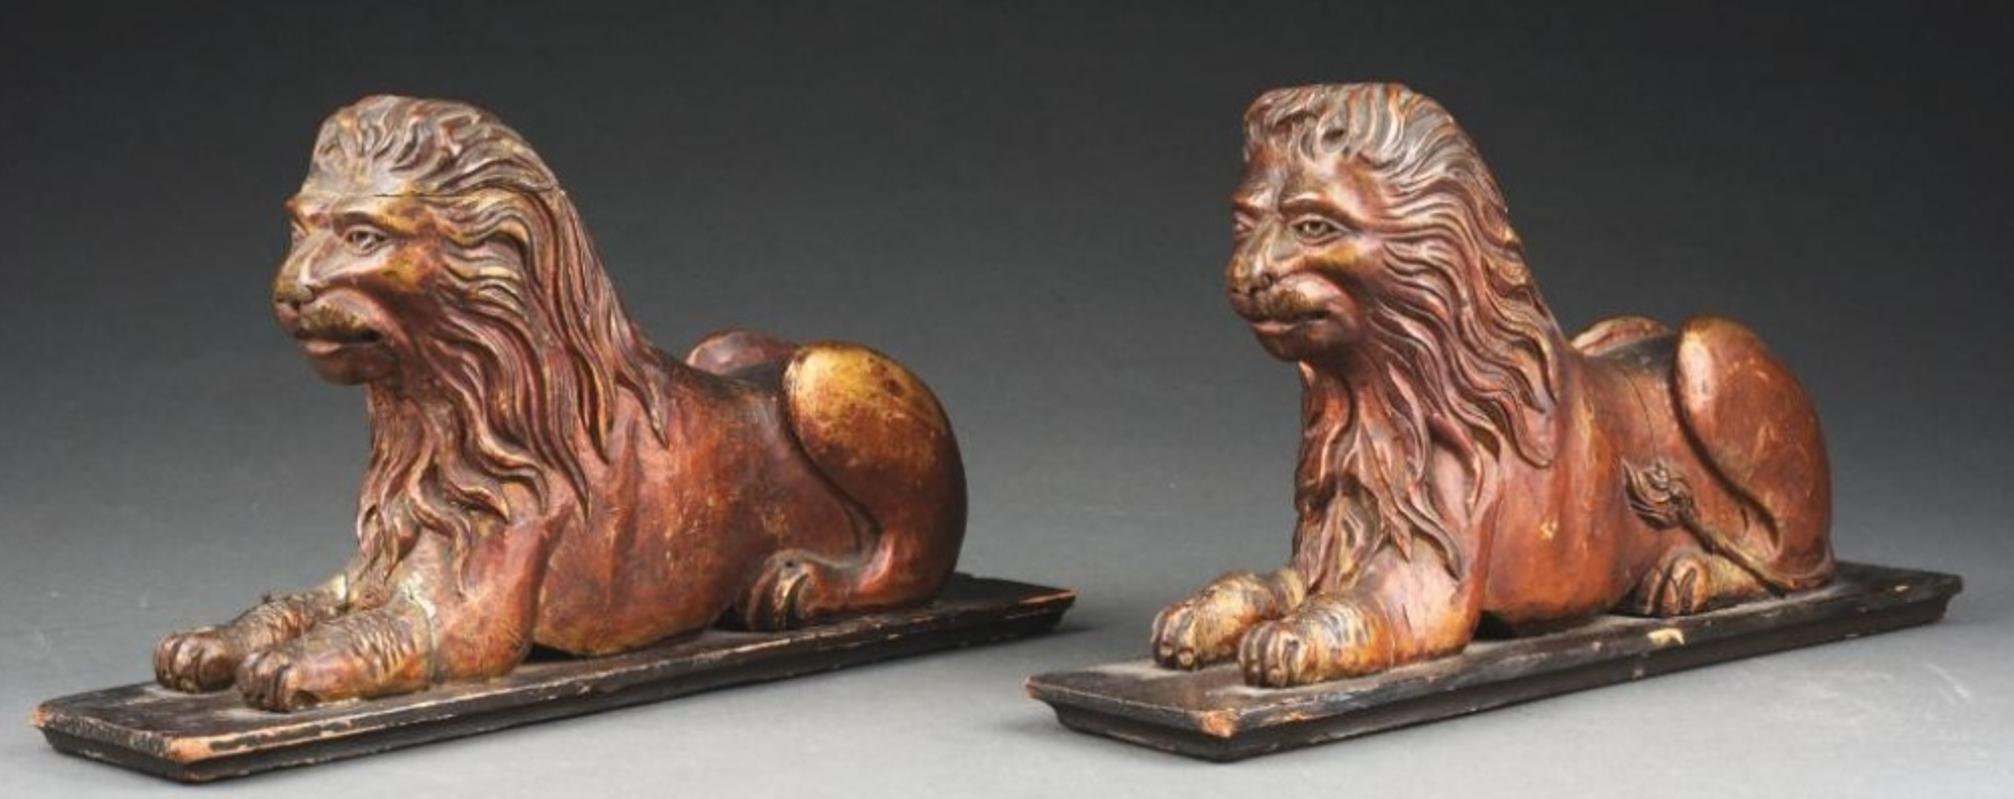 Pair of late 19th century wood and gilt Lions from Asia
Circa 1880. Measure: 8.5